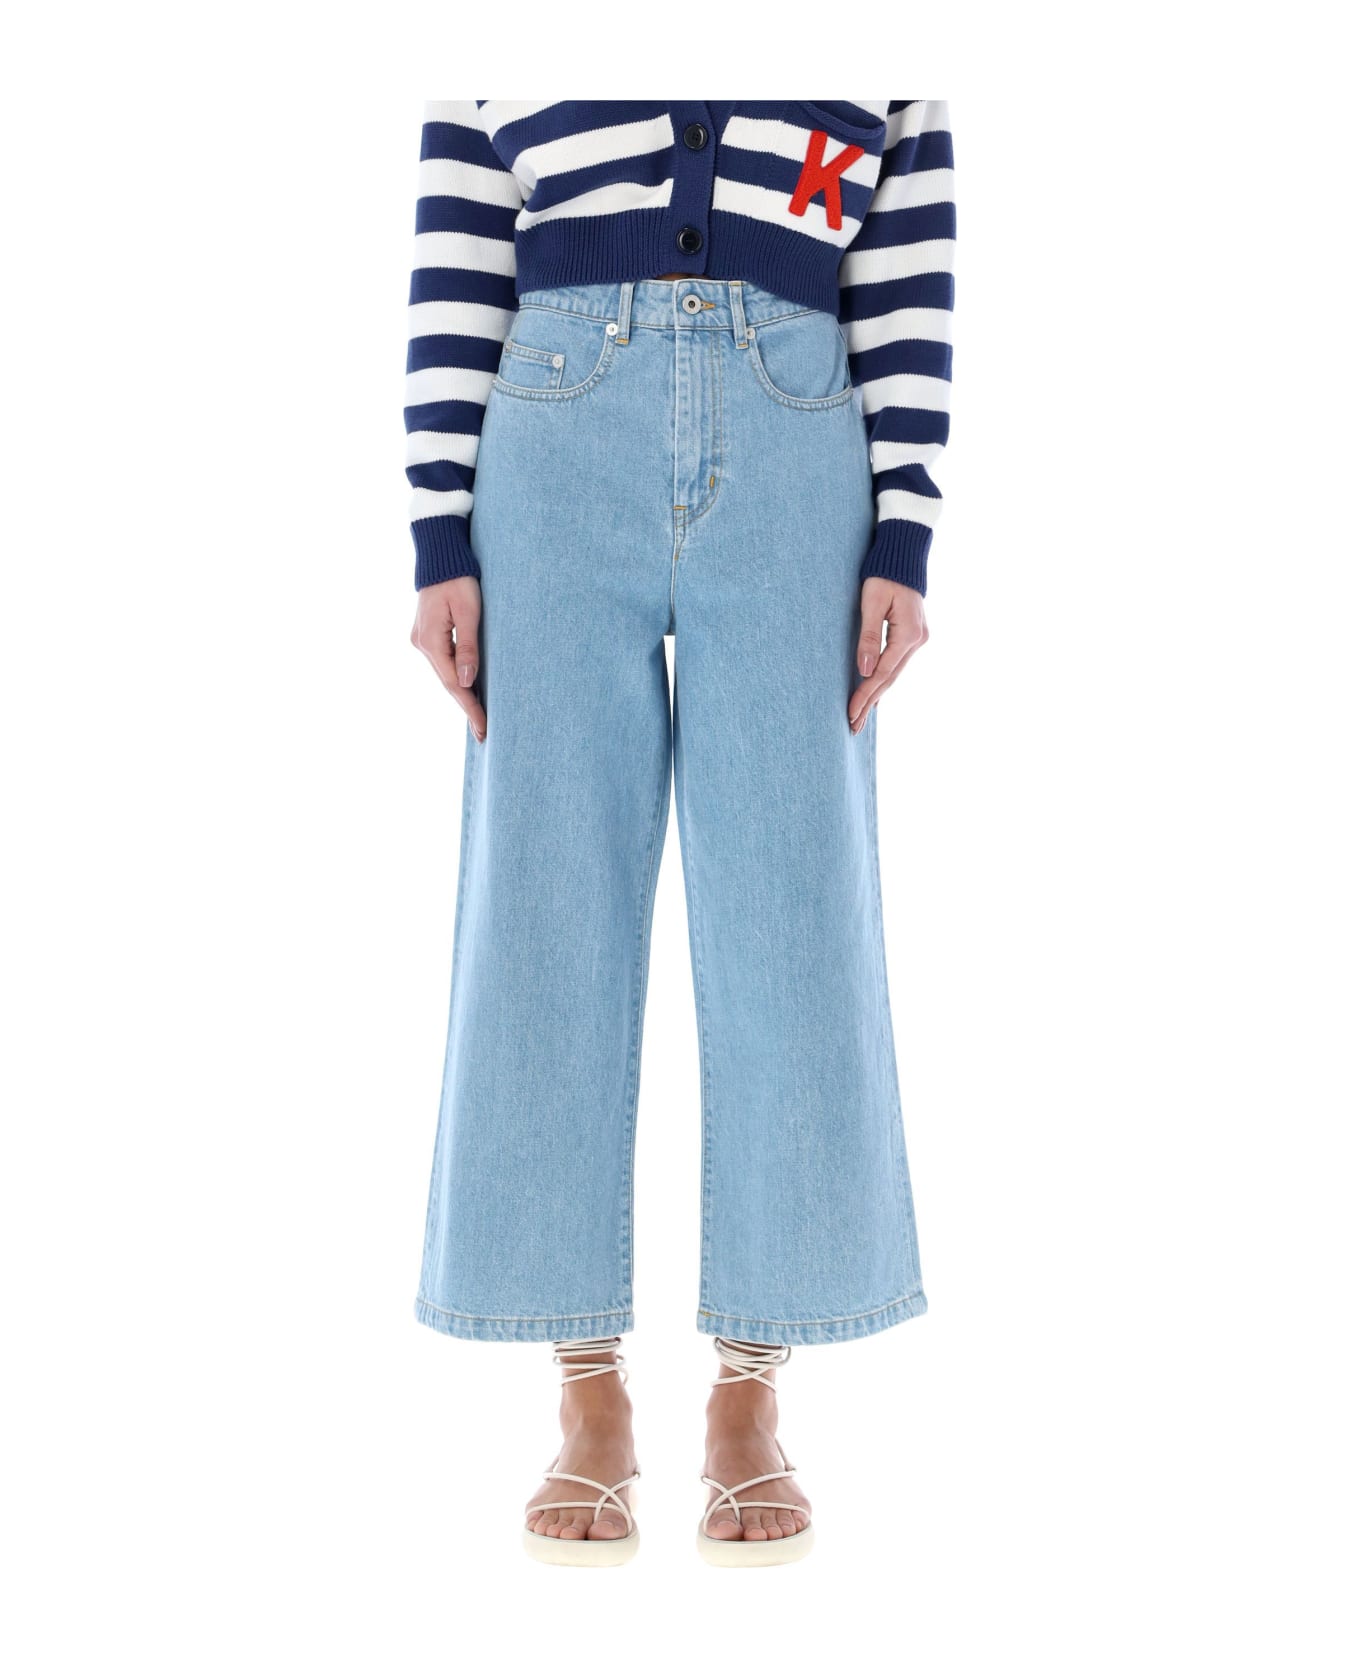 Kenzo Sumire Cropped Jeans - BLEACHED BLUE